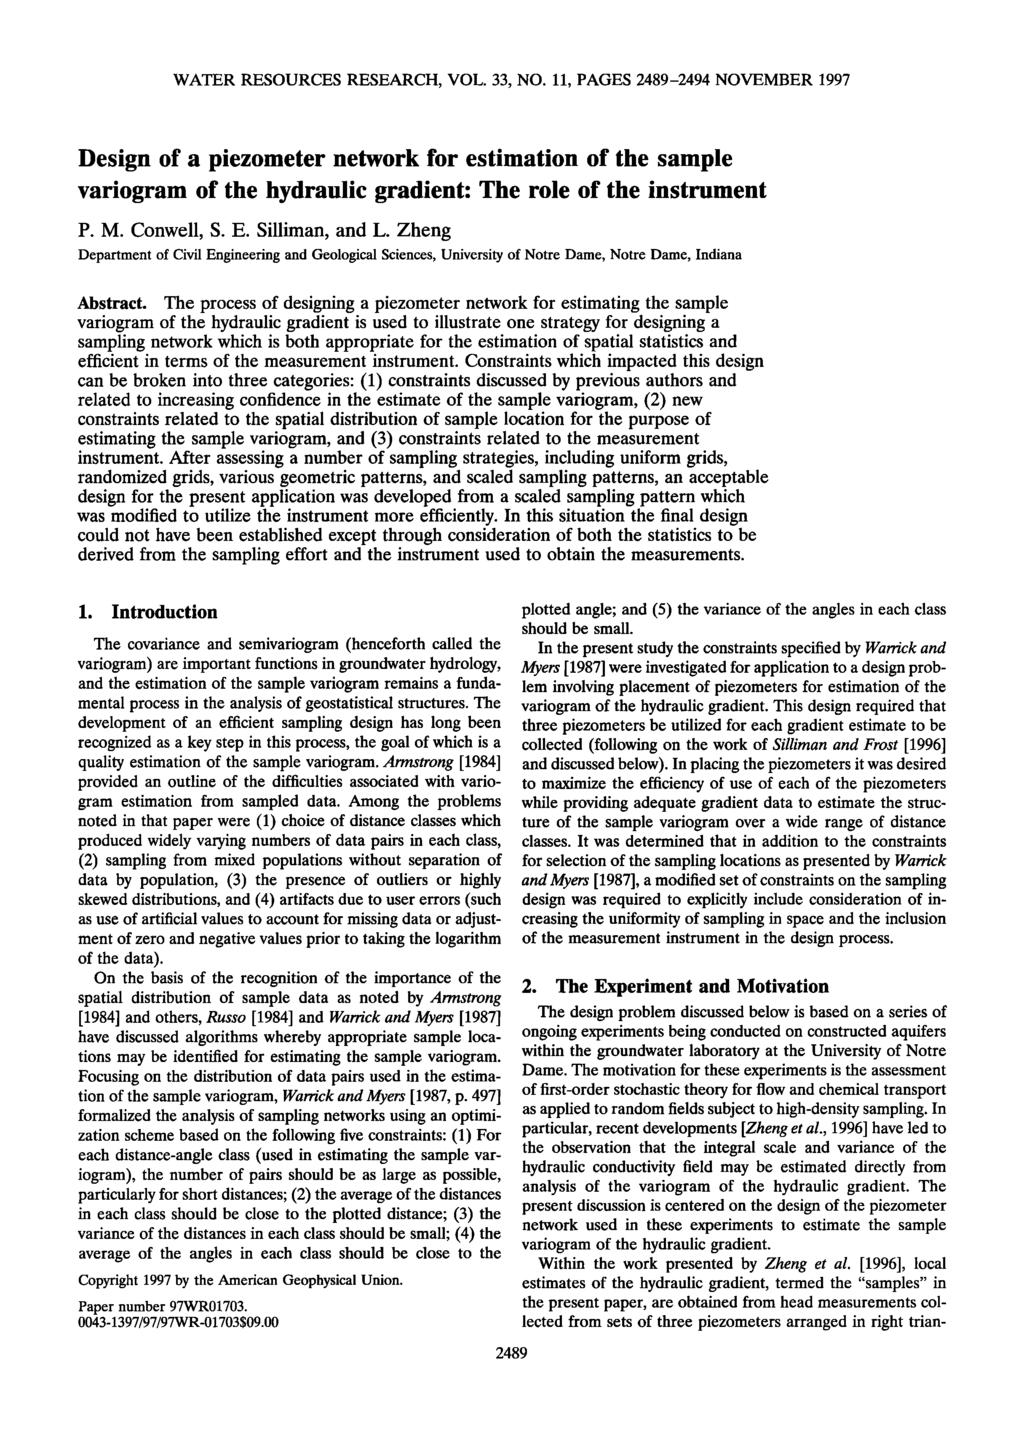 WATER RESOURCES RESEARCH, VOL. 33, NO. 11, PAGES 2489-2494 NOVEMBER 1997 Design of a piezometer network for estimation of the sample variogram of the hydraulic gradient: The role of the instrument P.